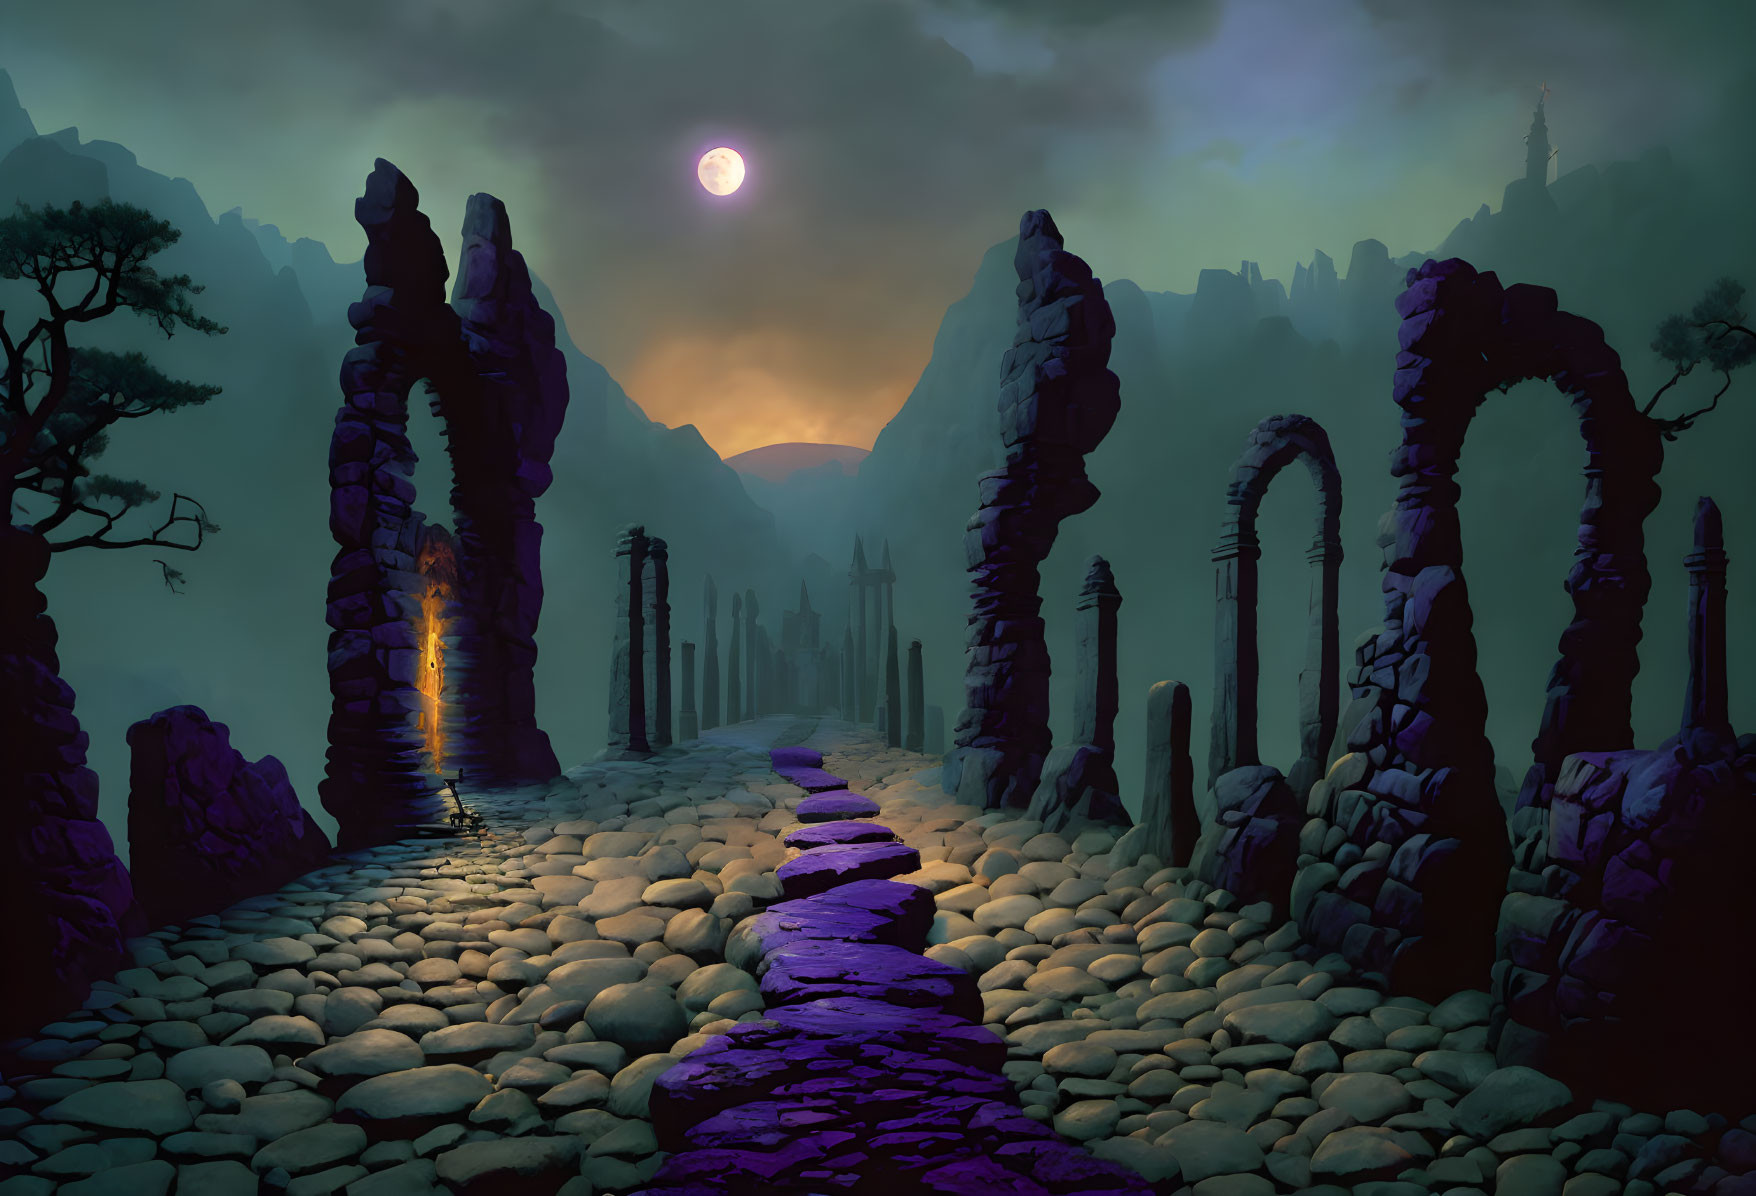 Mysterious cobblestone path through ancient ruins at twilight